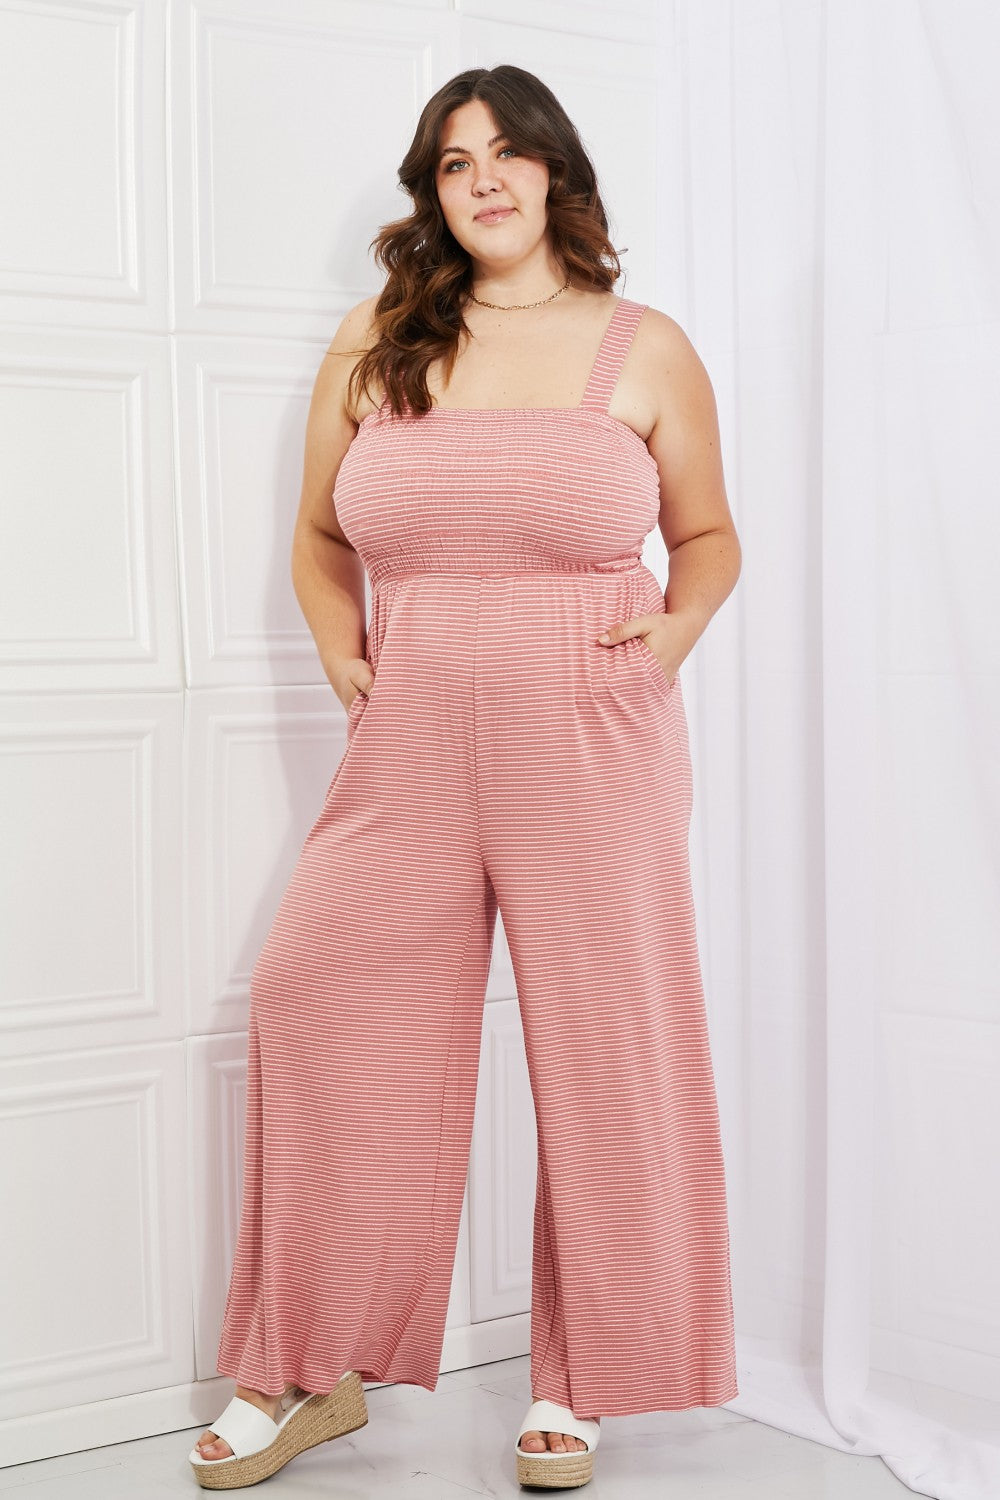 Only Exception Dusty Pink Striped Jumpsuit S-3XL